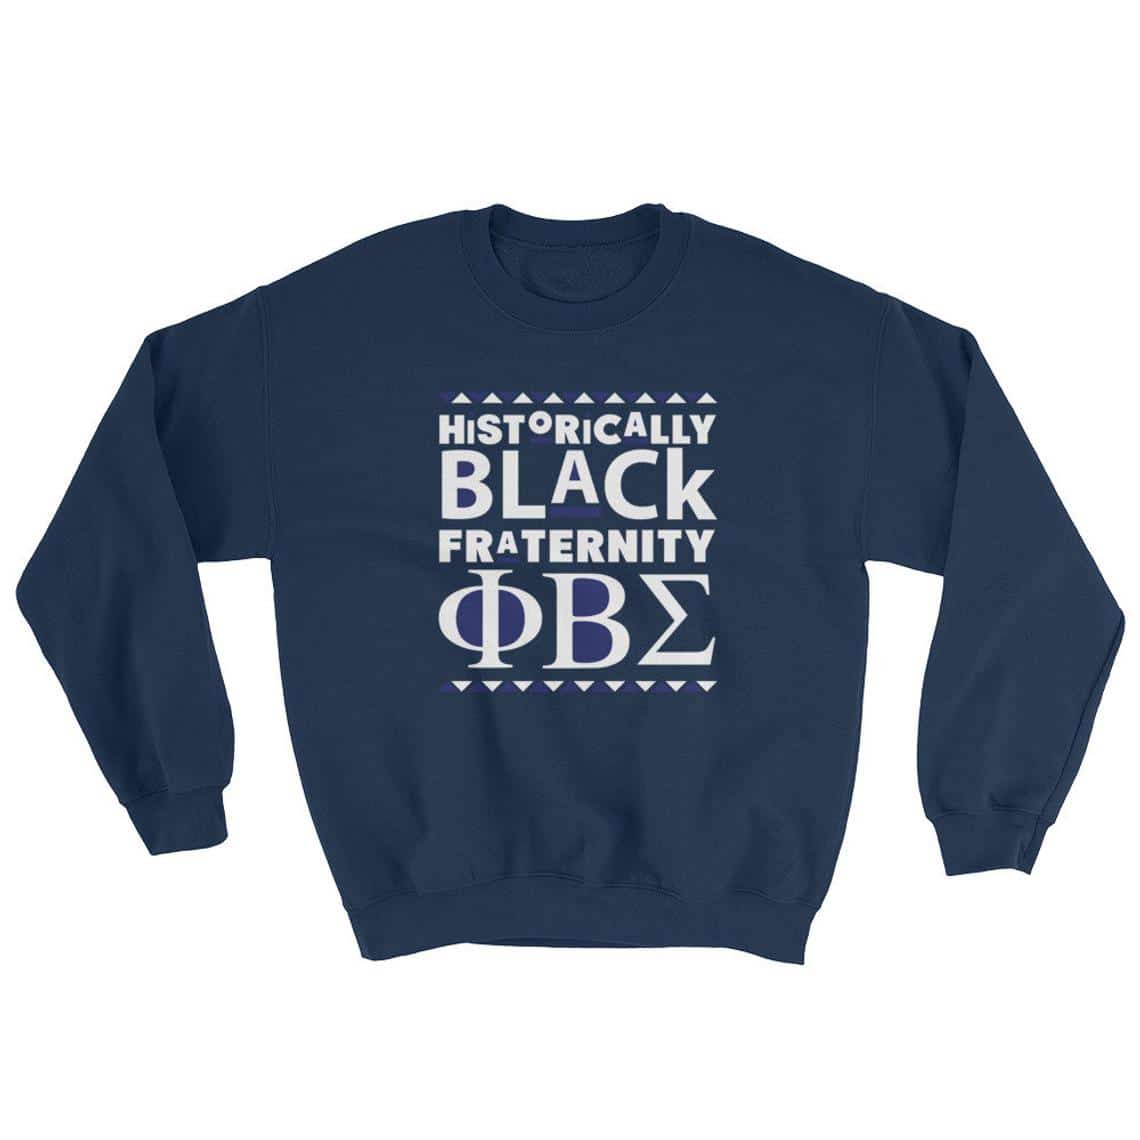 These Valentine's Day Gifts Will Fill Your Sigma Man With Brotherhood and Pride